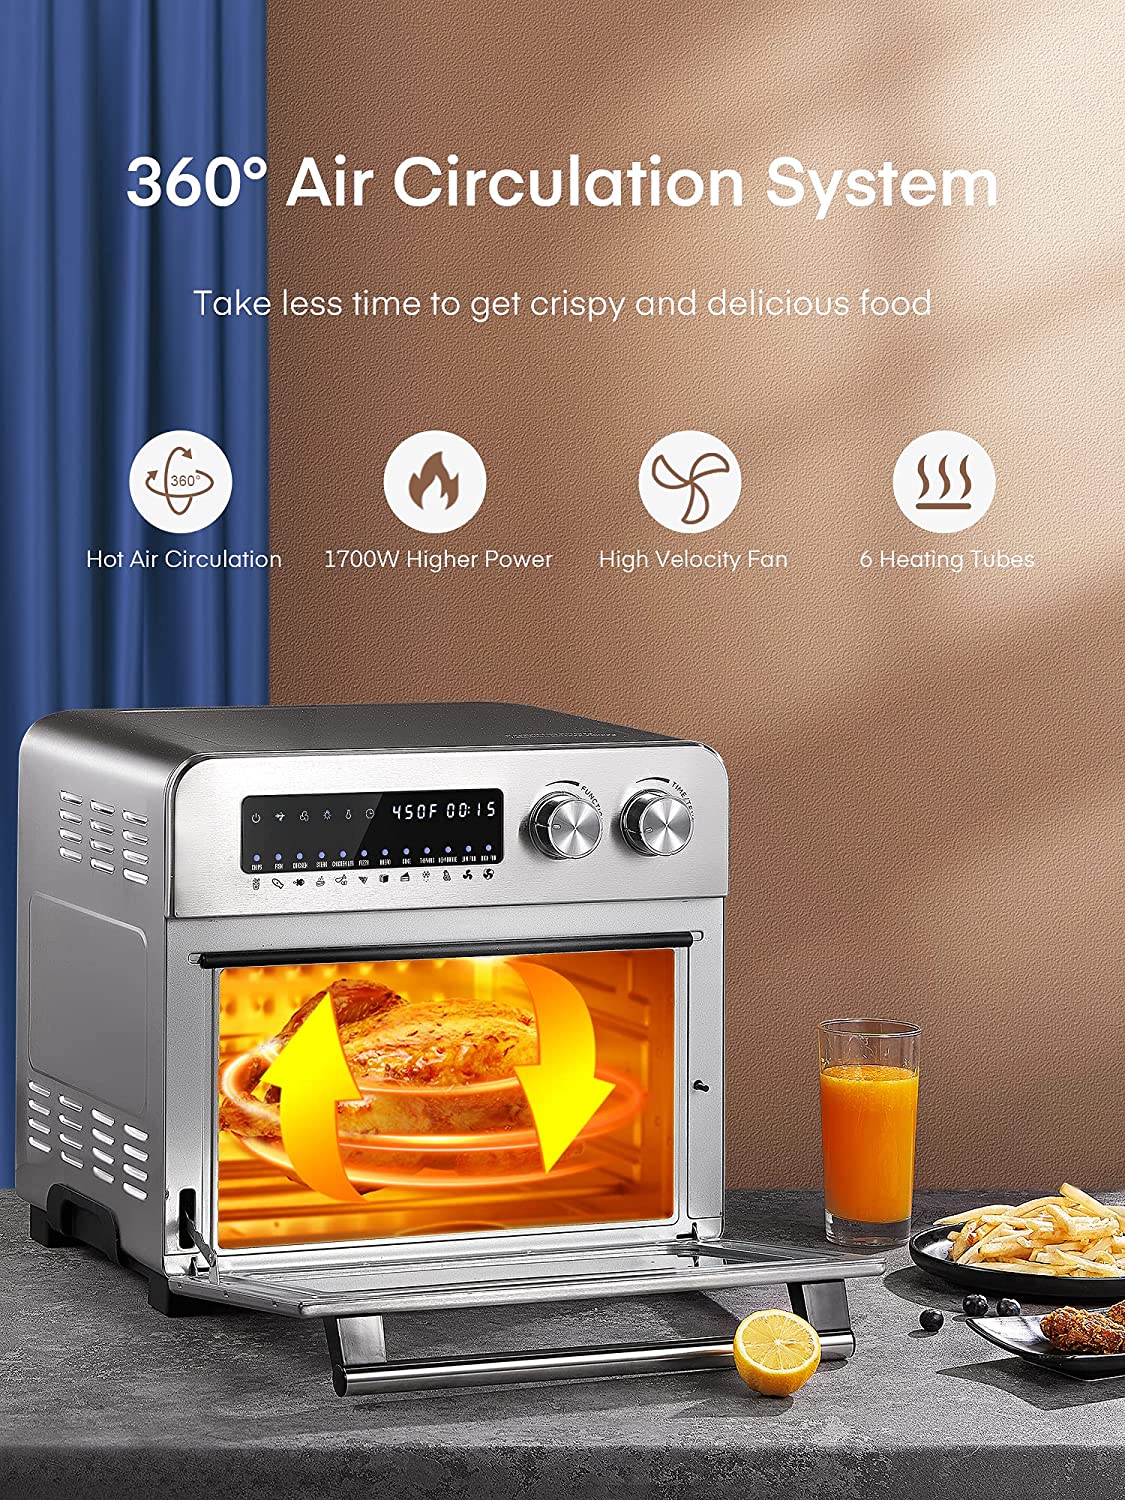 AICOOK Air Fryer Oven 24 QT, oven with 360° Air Circulation System, 12-in-1 Air Fryer 1700W Digital Large Convection Oven with Rotisserie and Dehydrator for Chicken, French Fries and Pizza, Air fryer Toaster Oven Include 8 Accessories